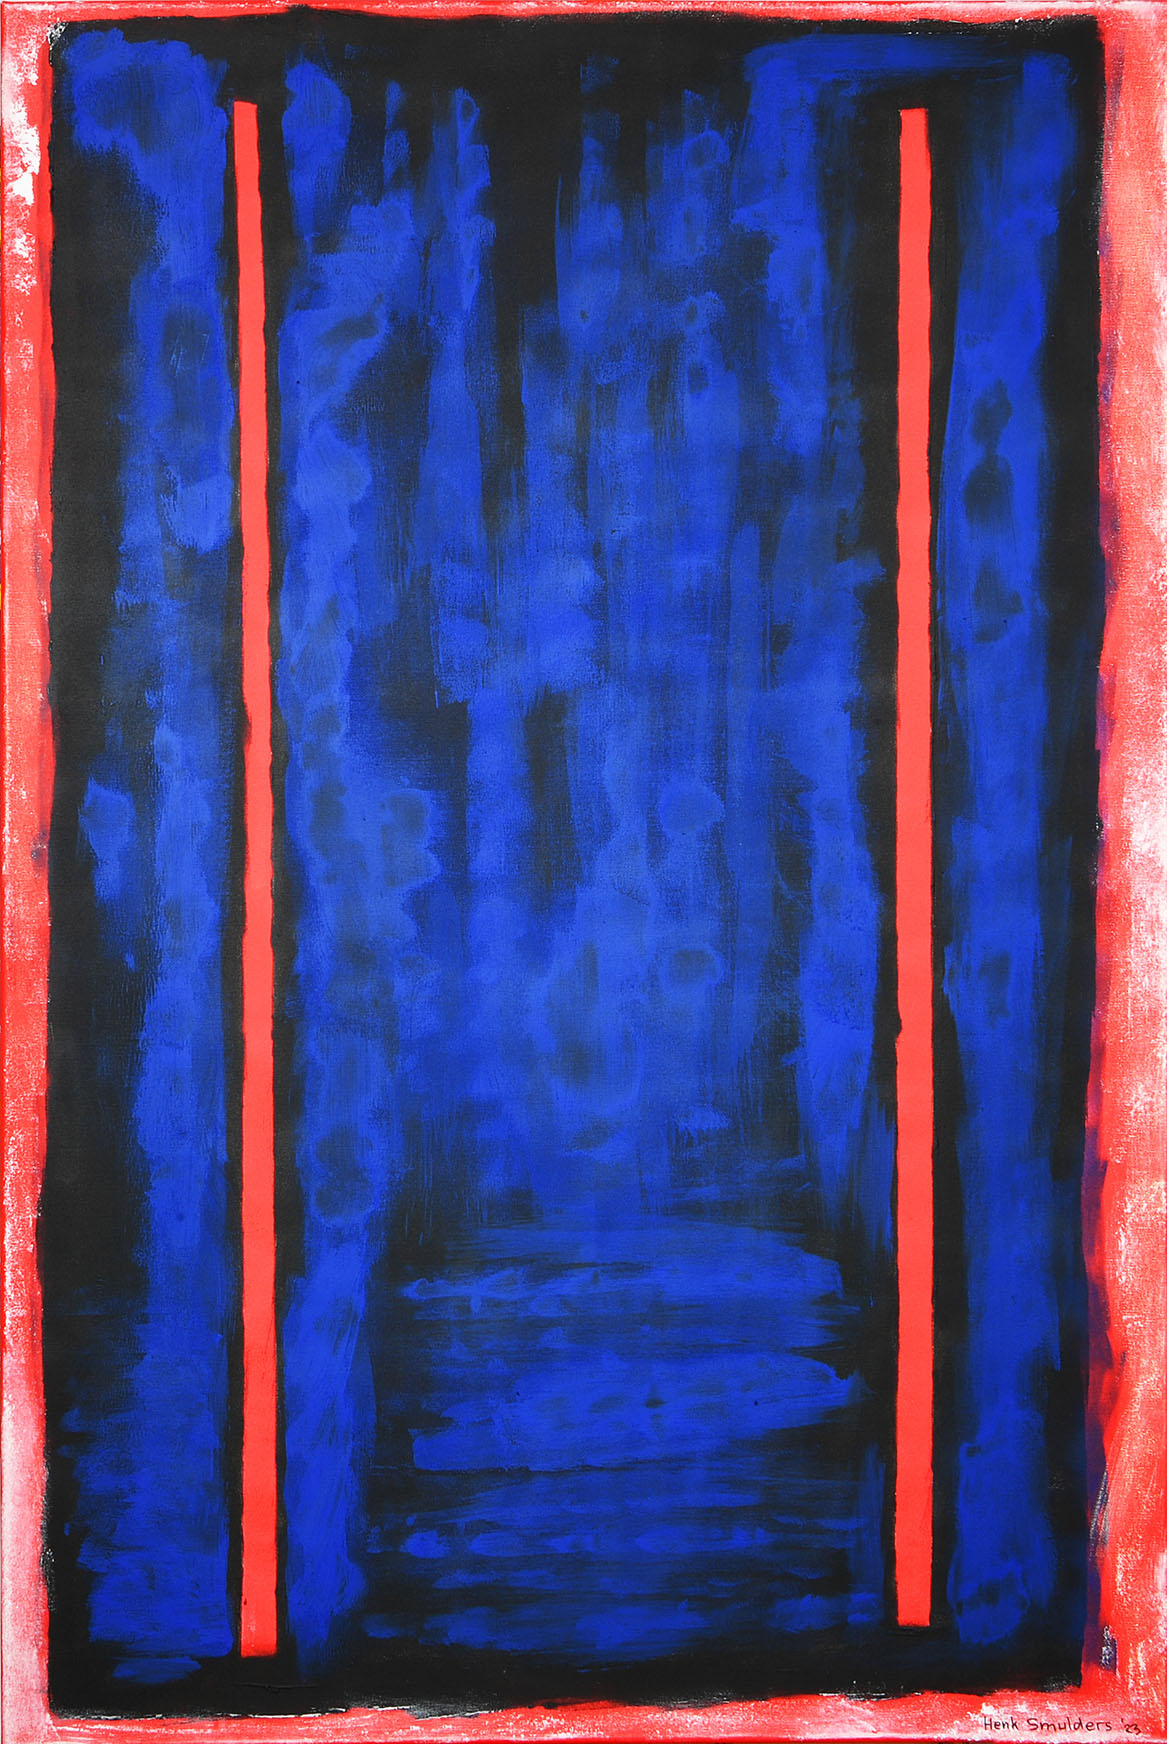 HENK SMULDERS // BLUE RED